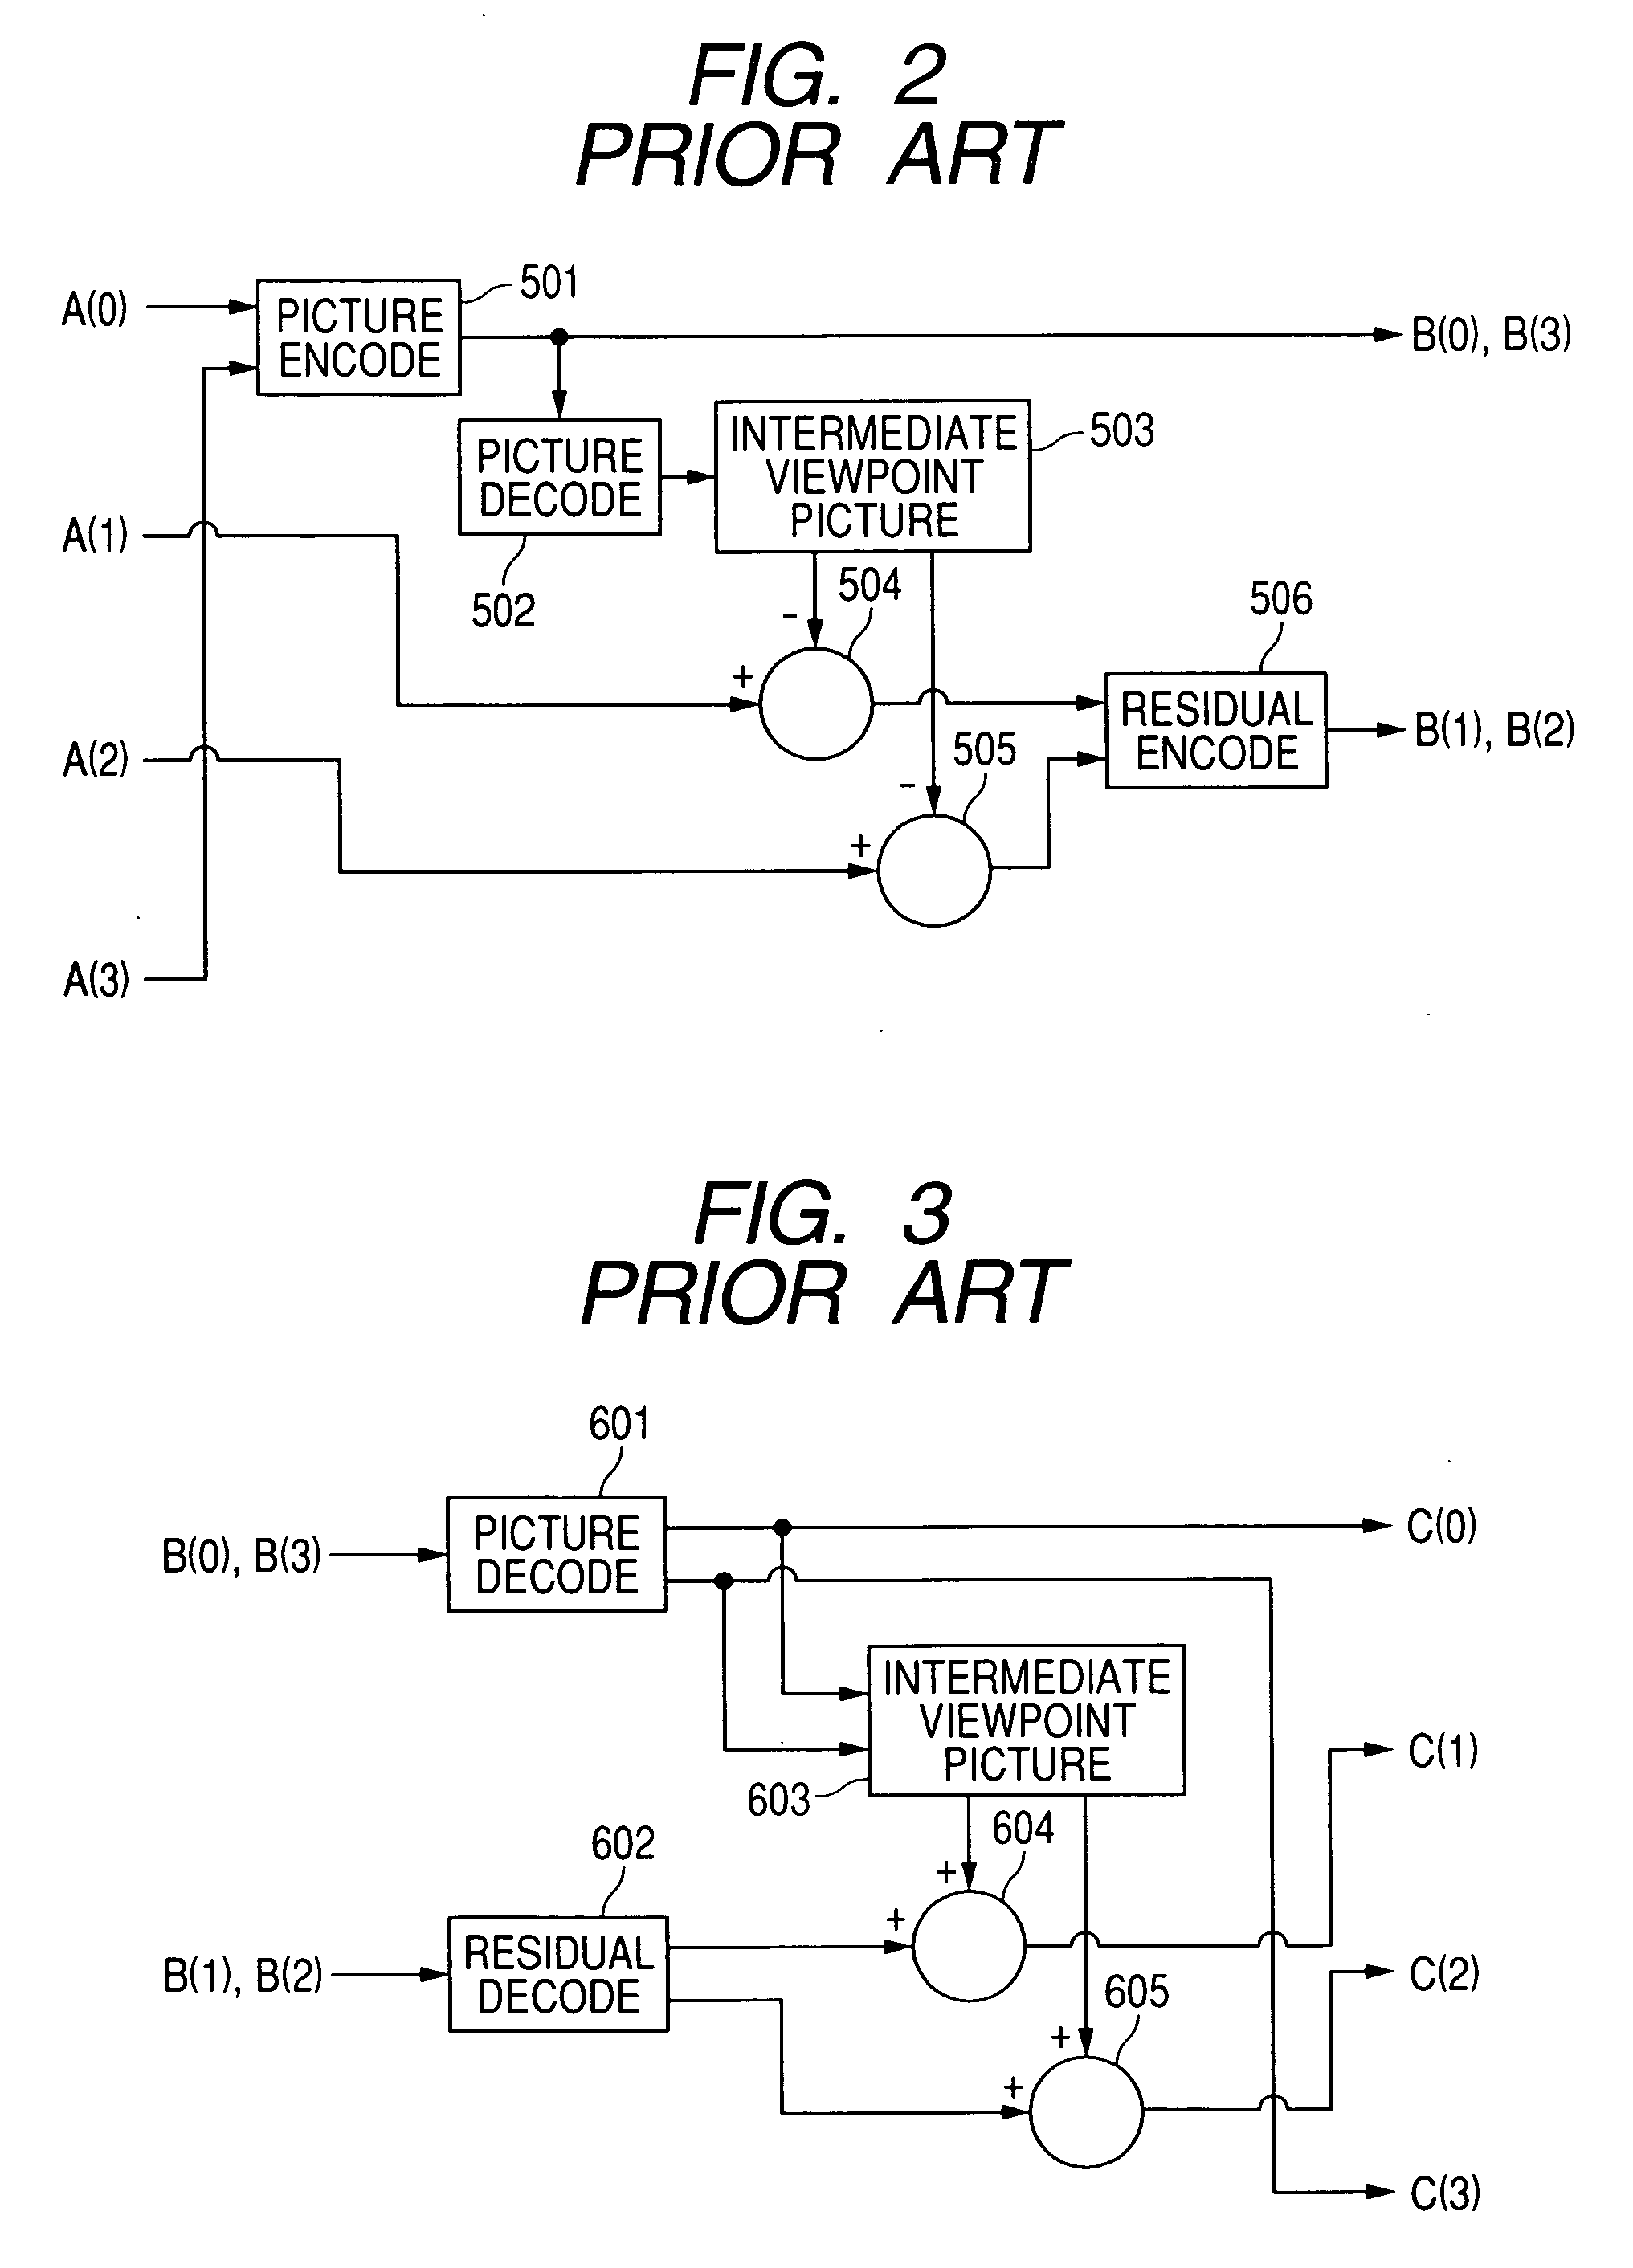 Method and apparatus for encoding and decoding picture signal, and related computer programs